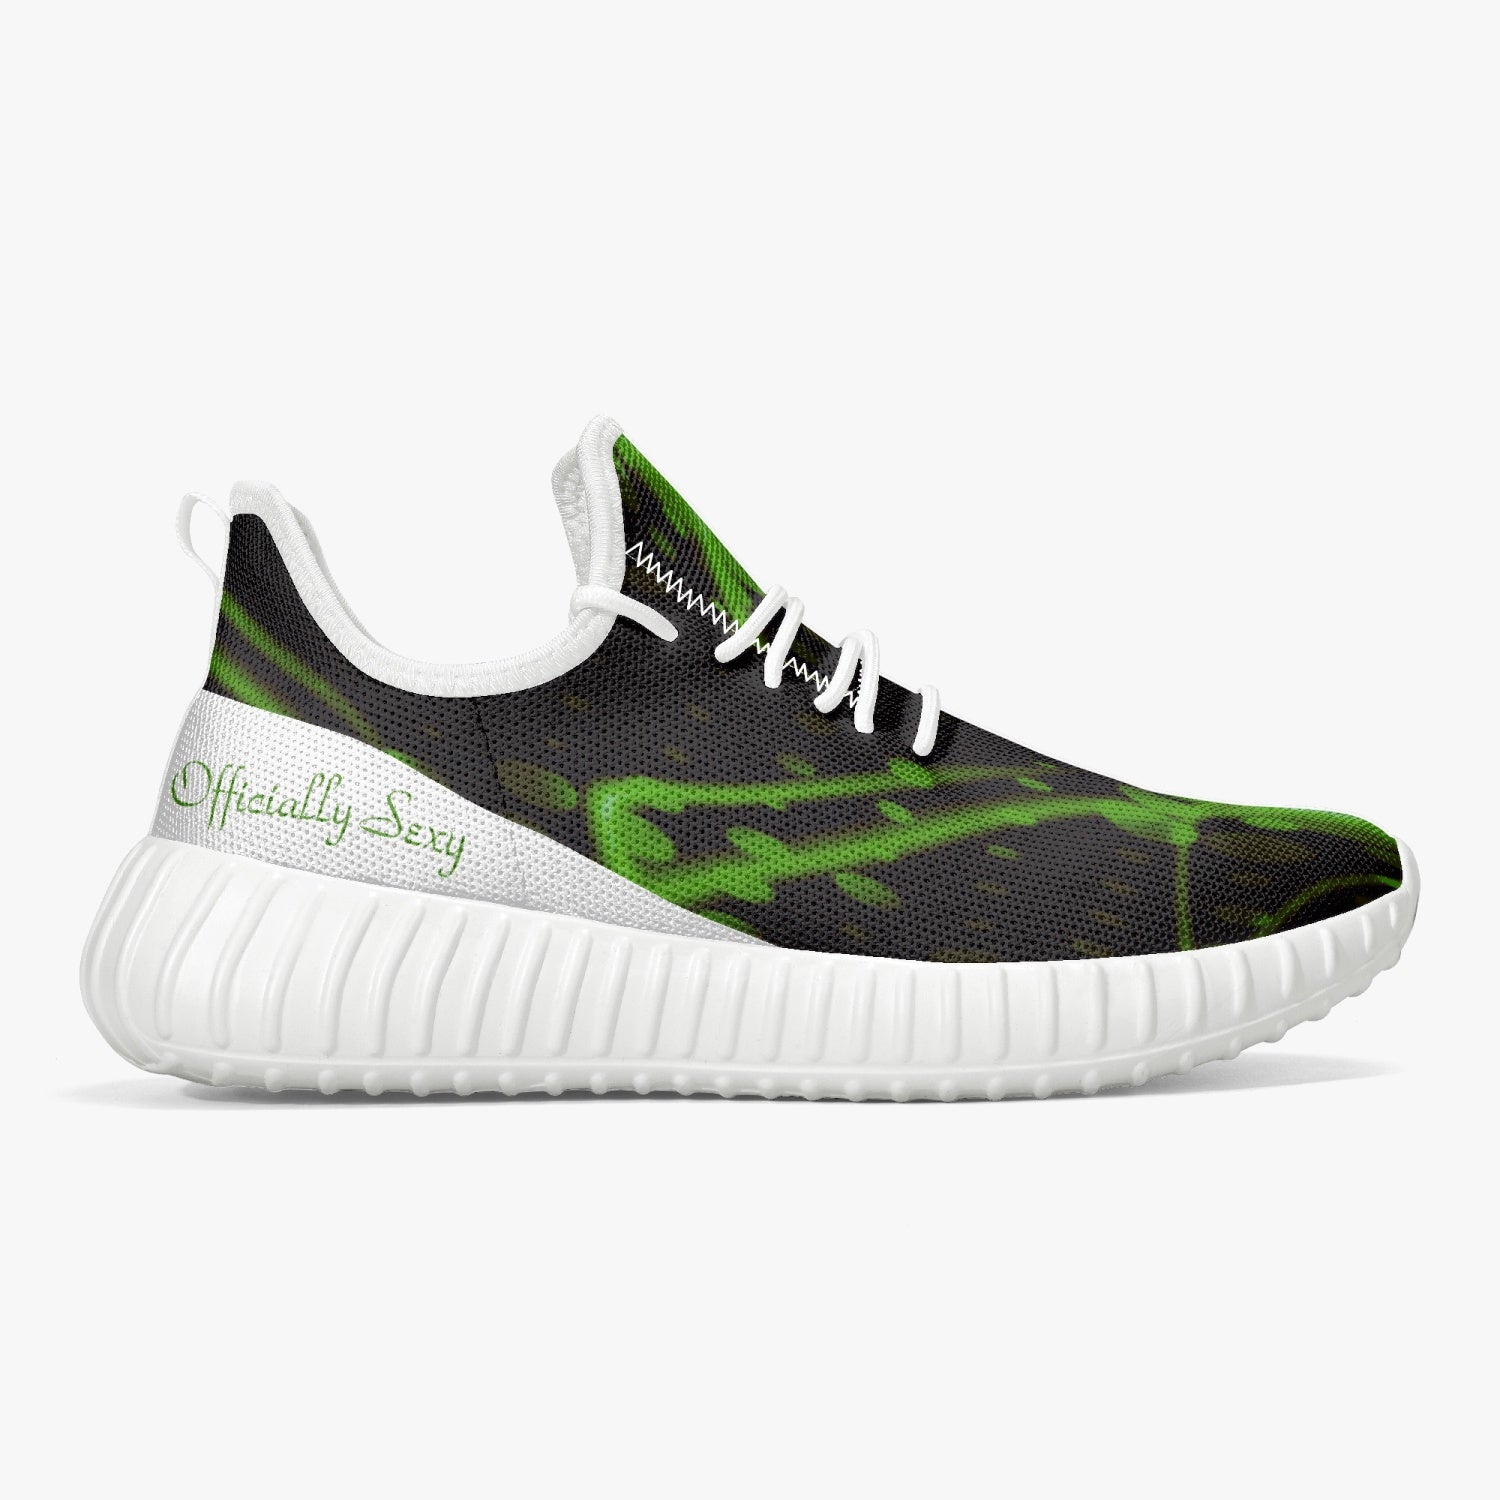 Officially Sexy Green & White Laser Print Mesh Knit Sneakers - With White or Black Sole